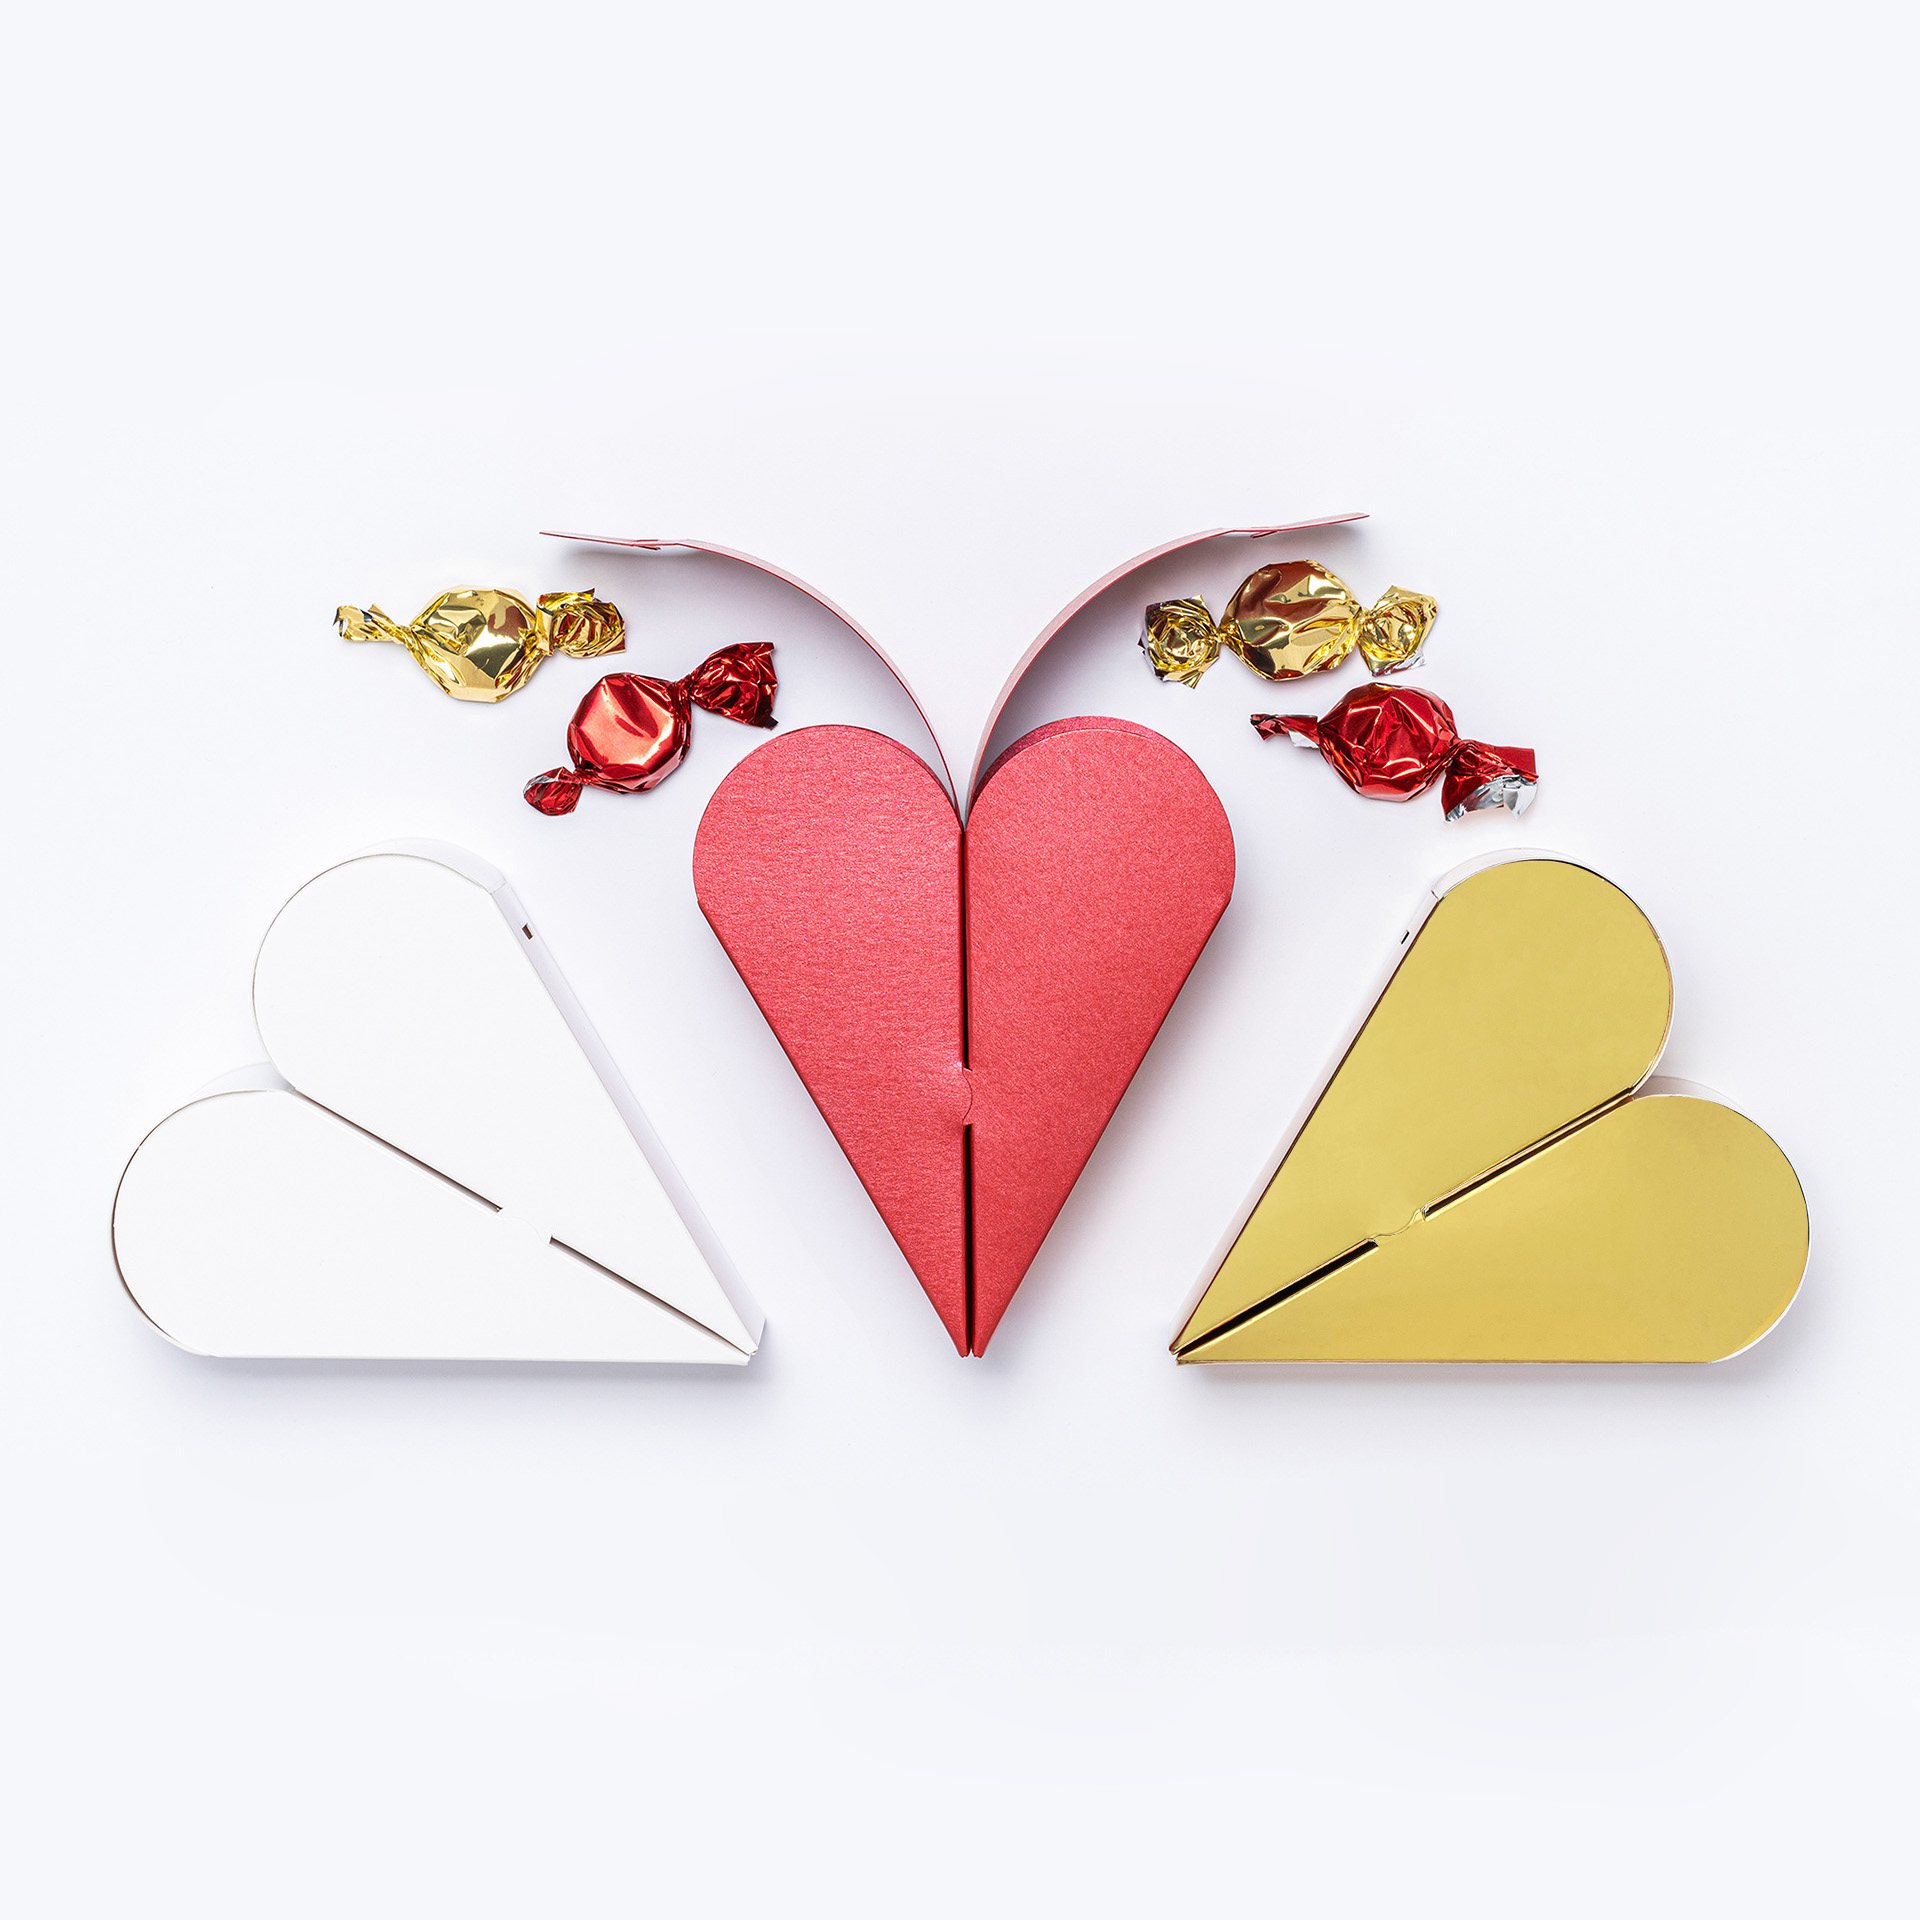 Two part heart gift box in bright gold, pearl red and white. Box open with wrapped sweets falling out